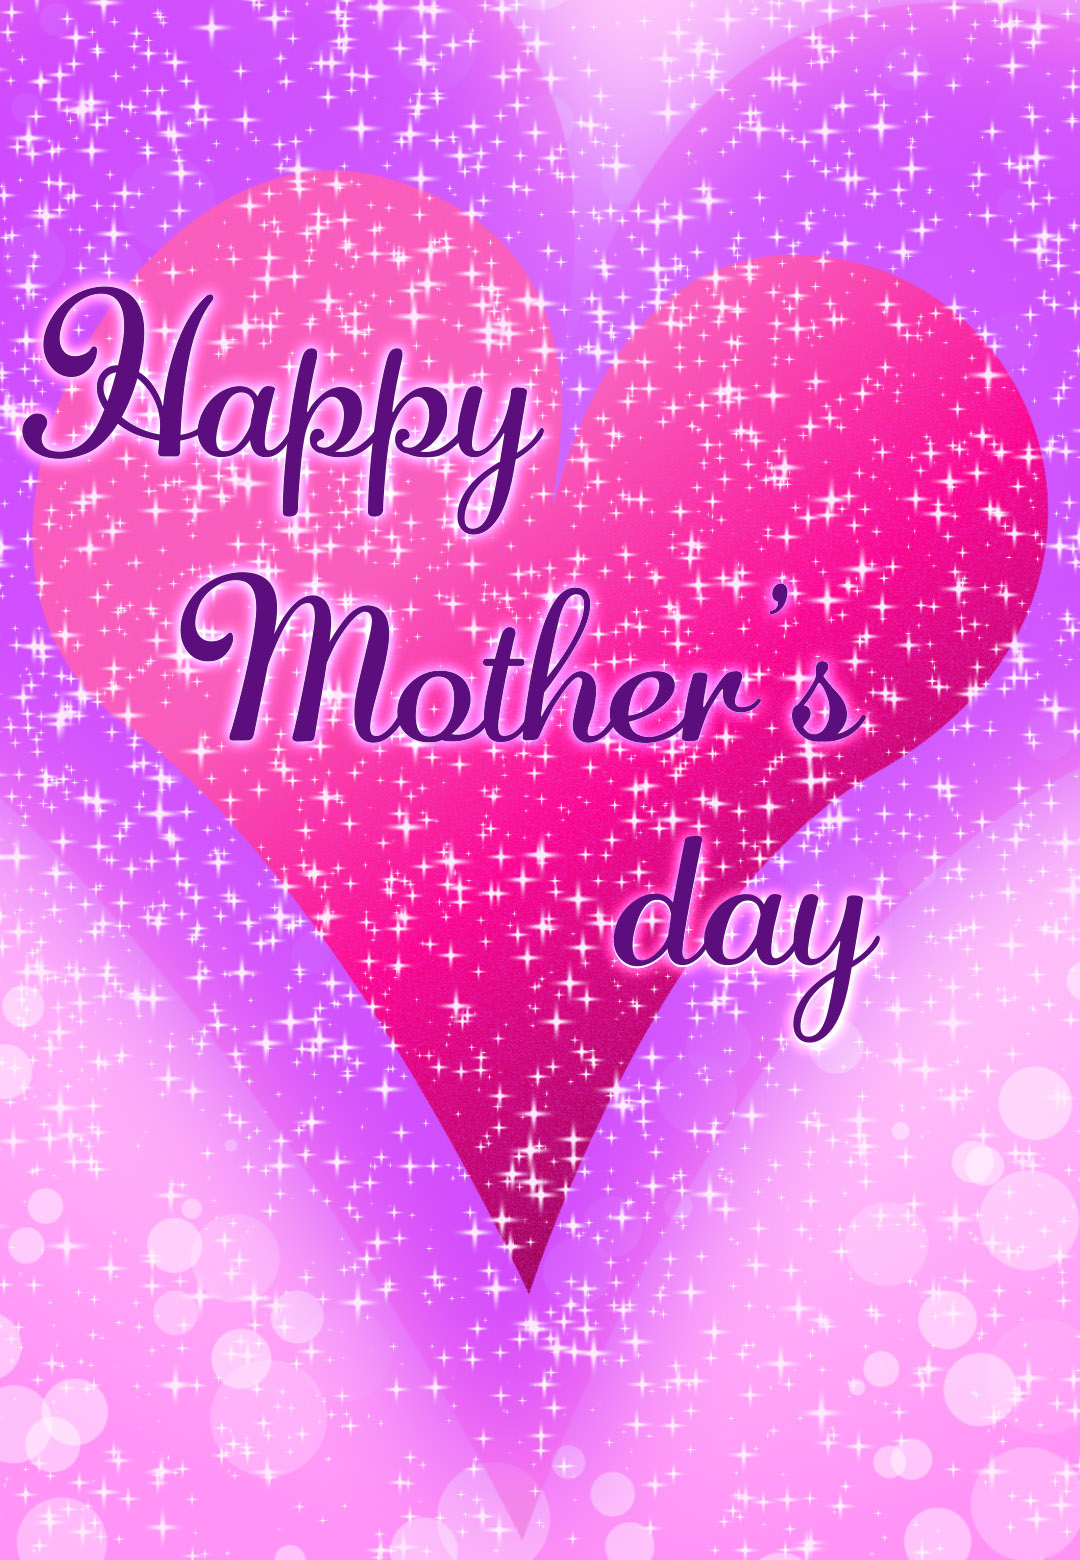 Happy Mothers Day Mother s Day Card Free Greetings 